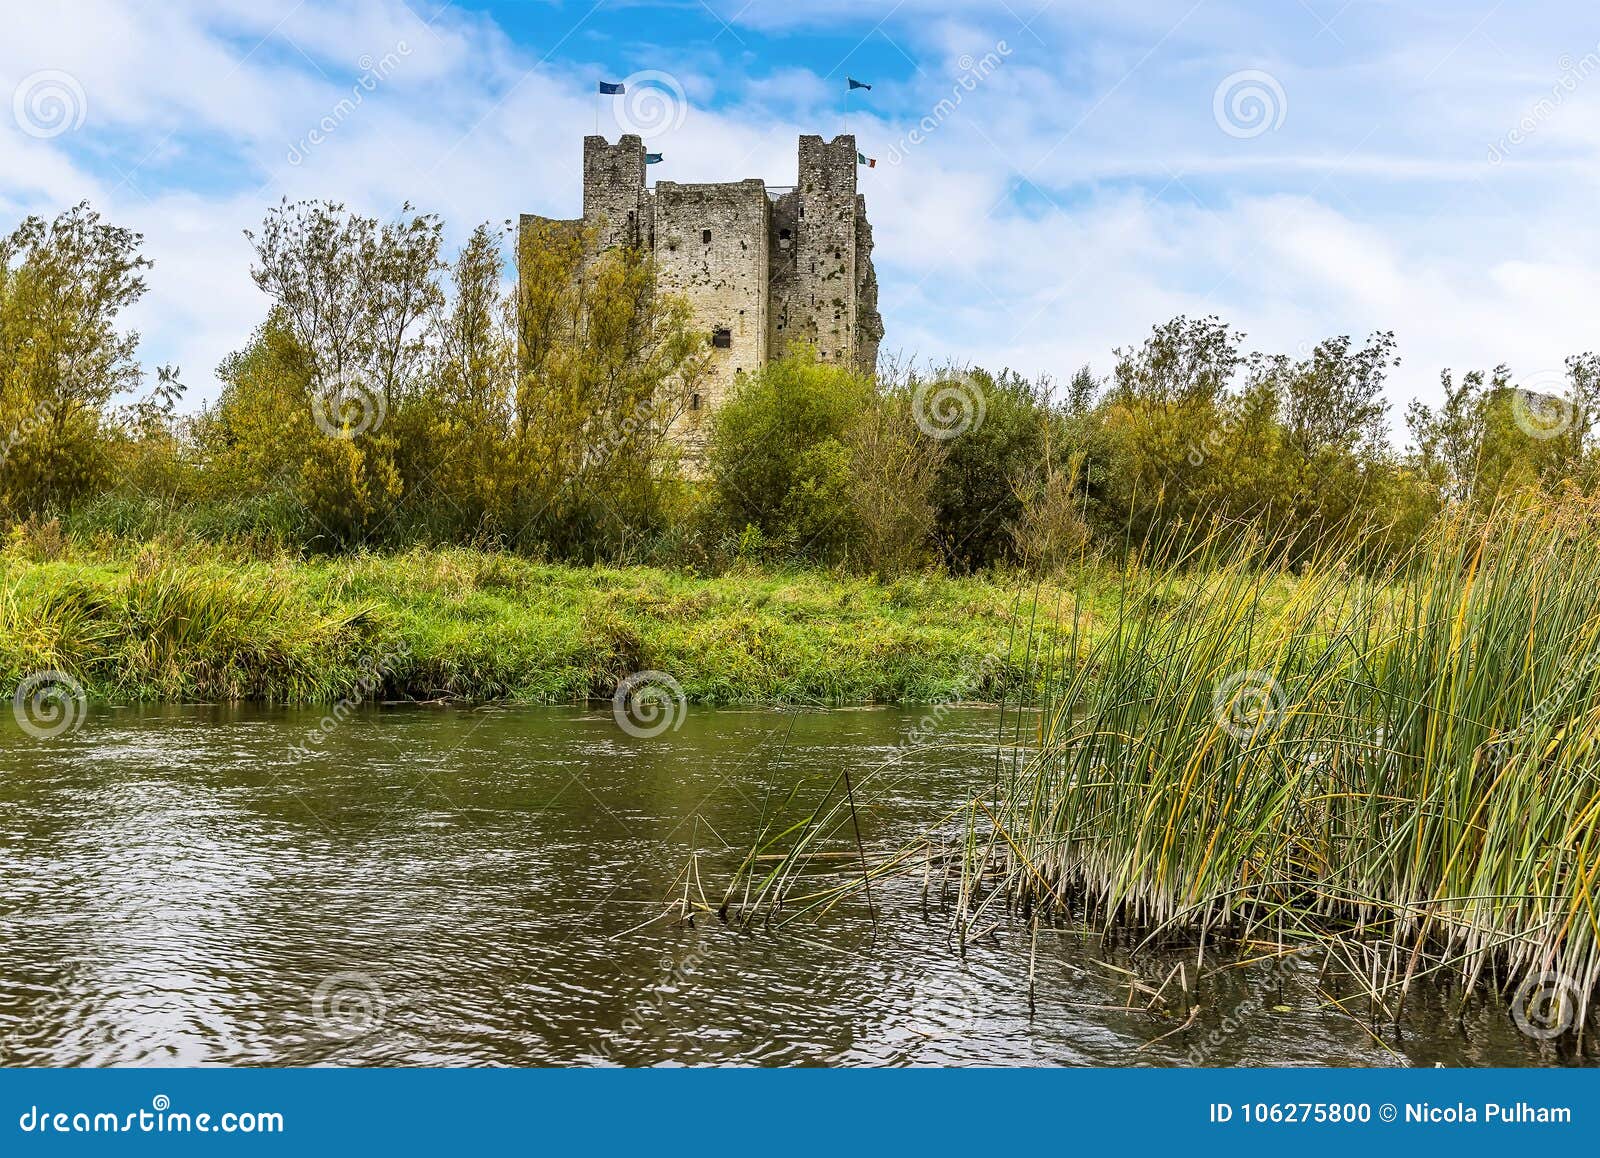 A View By A Bed Of Reeds Across The River Boyne At Trim Ireland Stock Photo Image Of Boyne Bridge